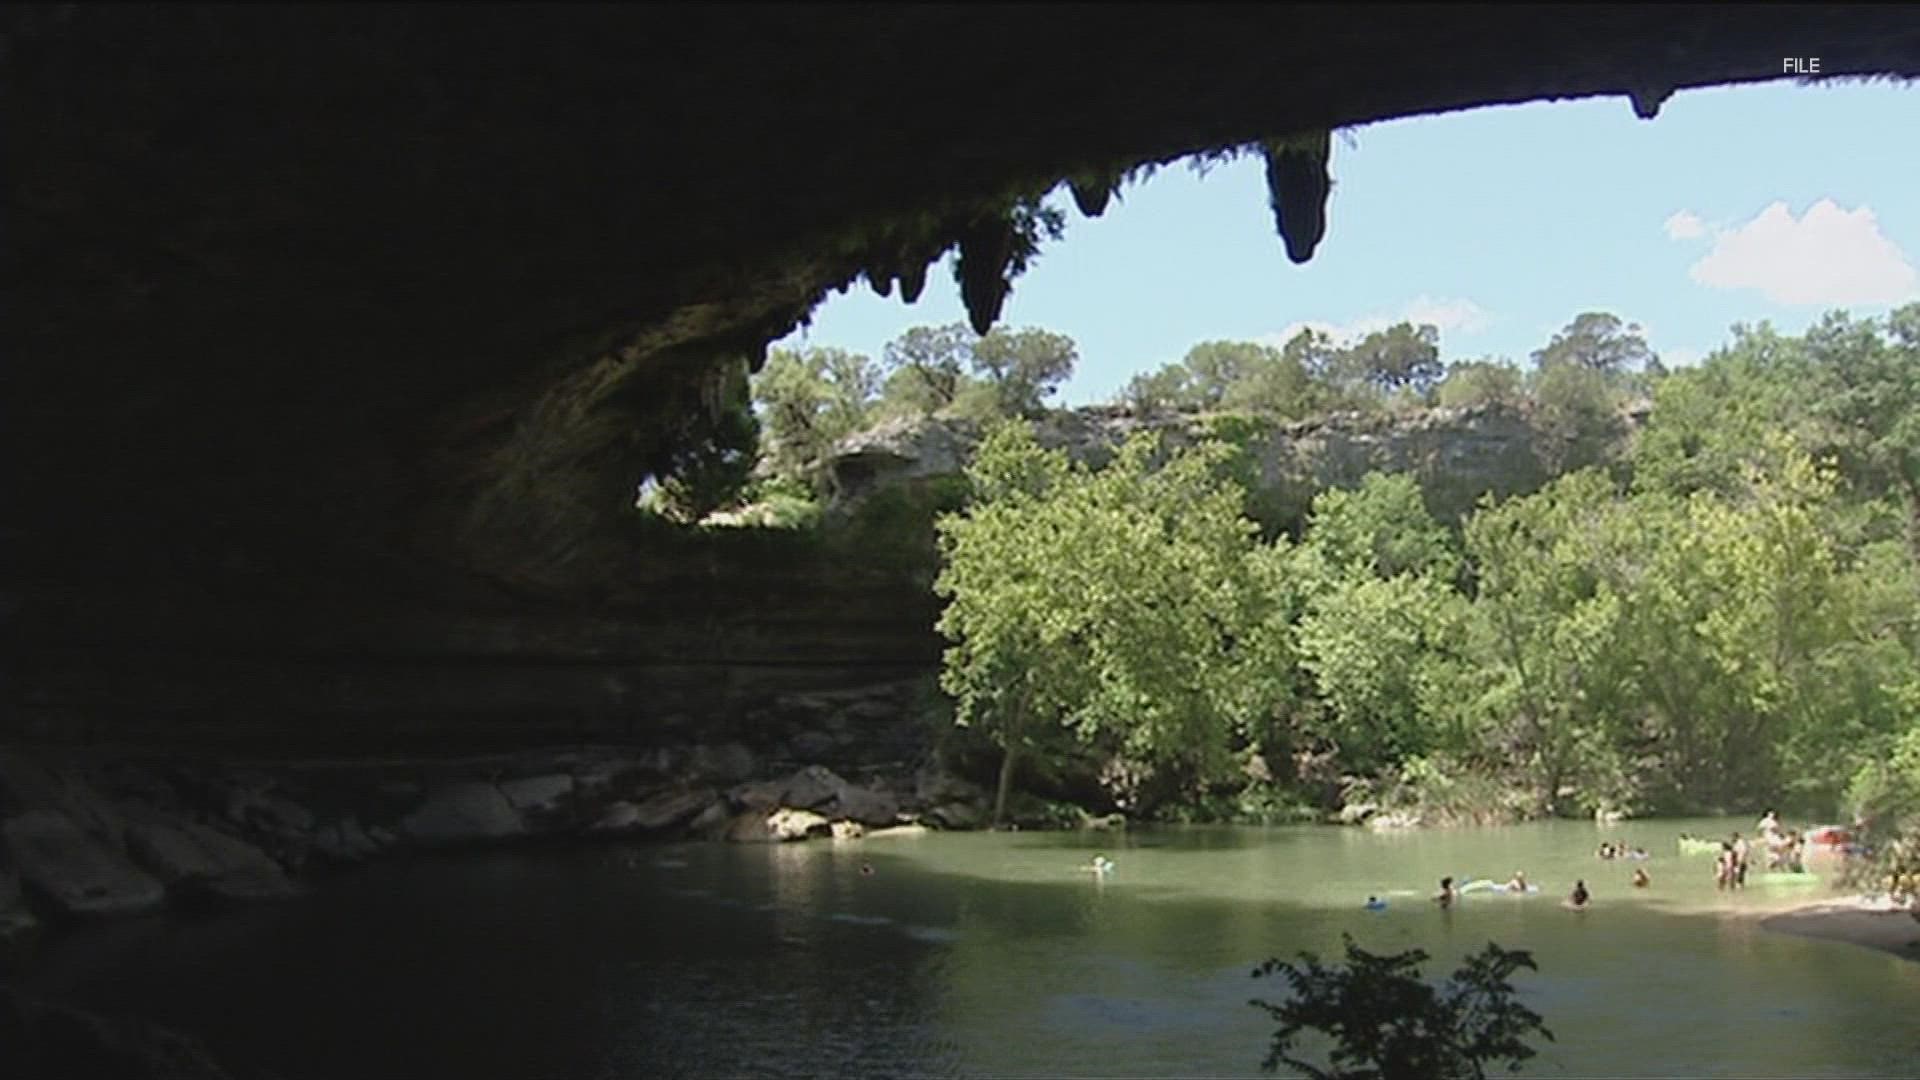 Hamilton Pool is back open again after test results showed the swimming hole now has safe bacteria levels.